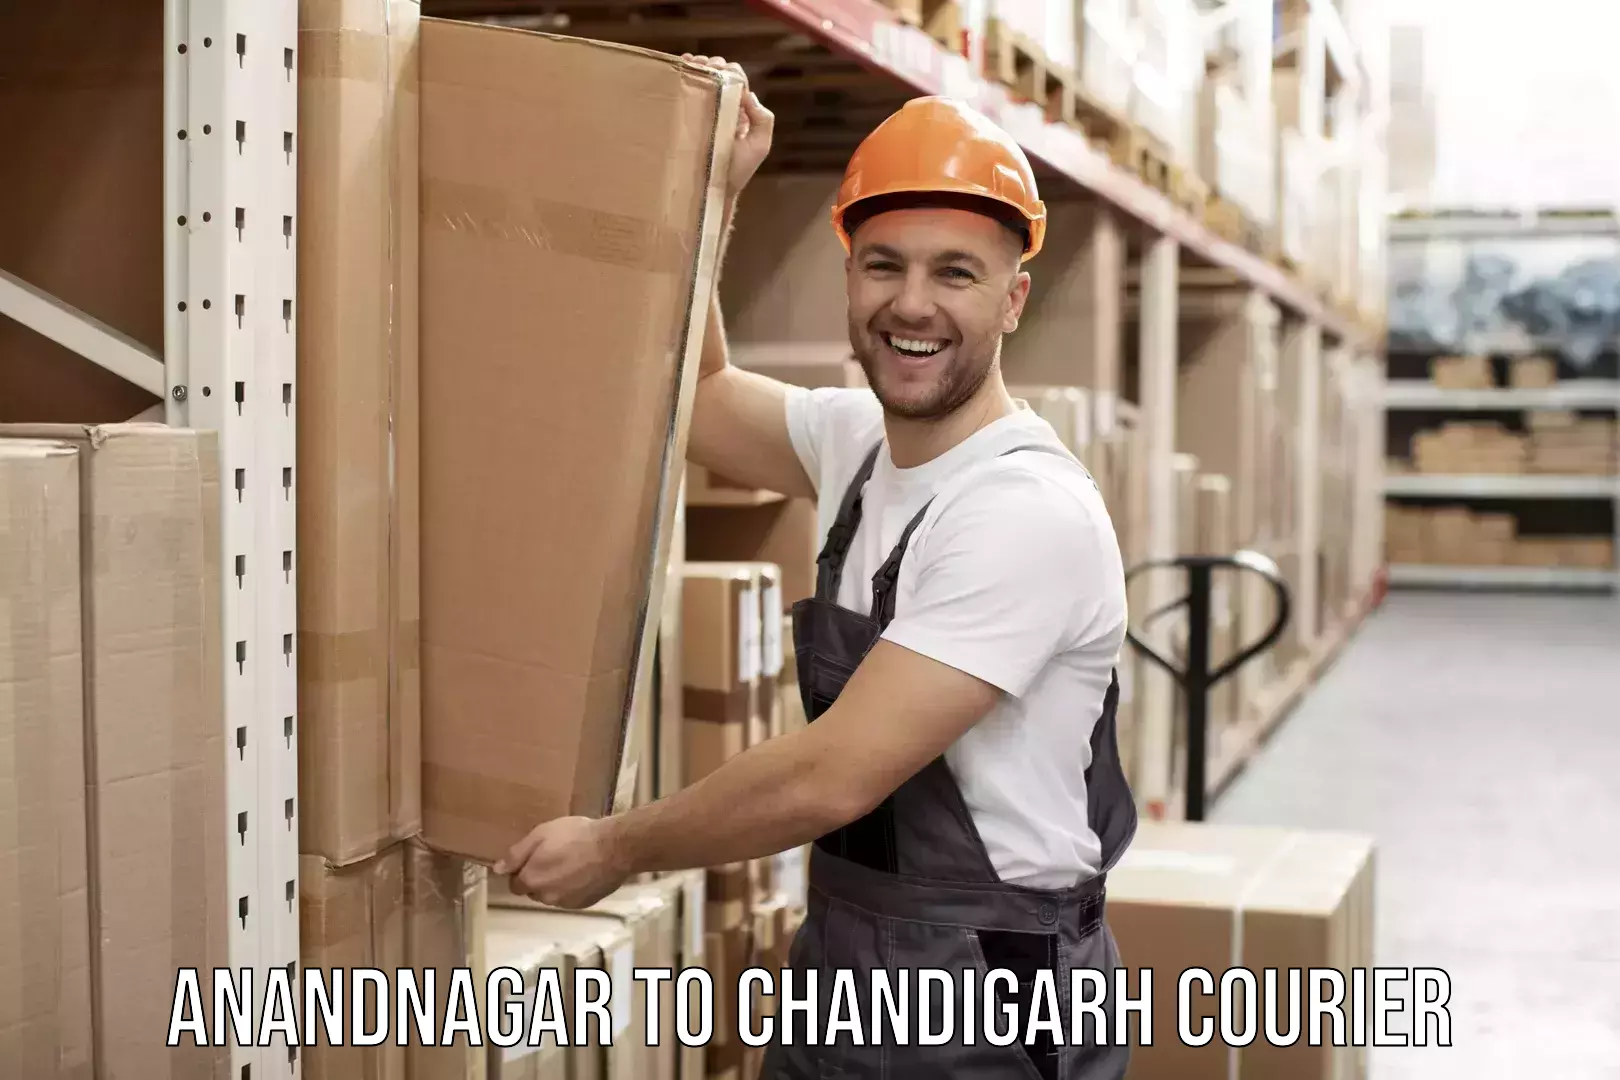 Home relocation experts Anandnagar to Chandigarh